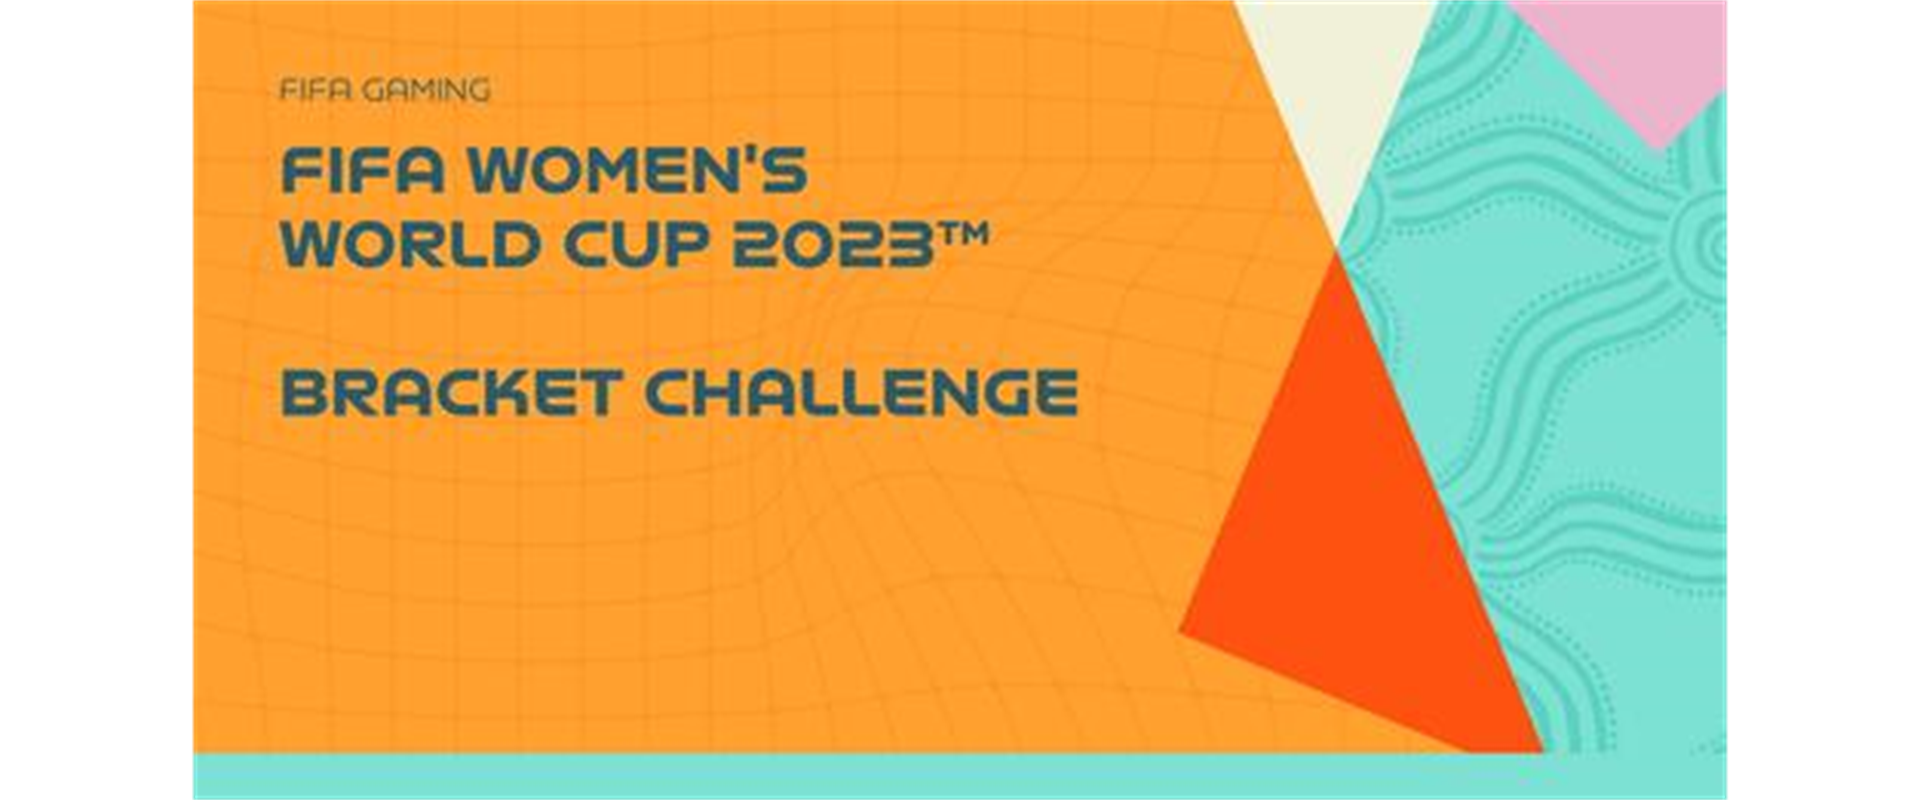 CYS bracket challenge for Women’s World Cup!